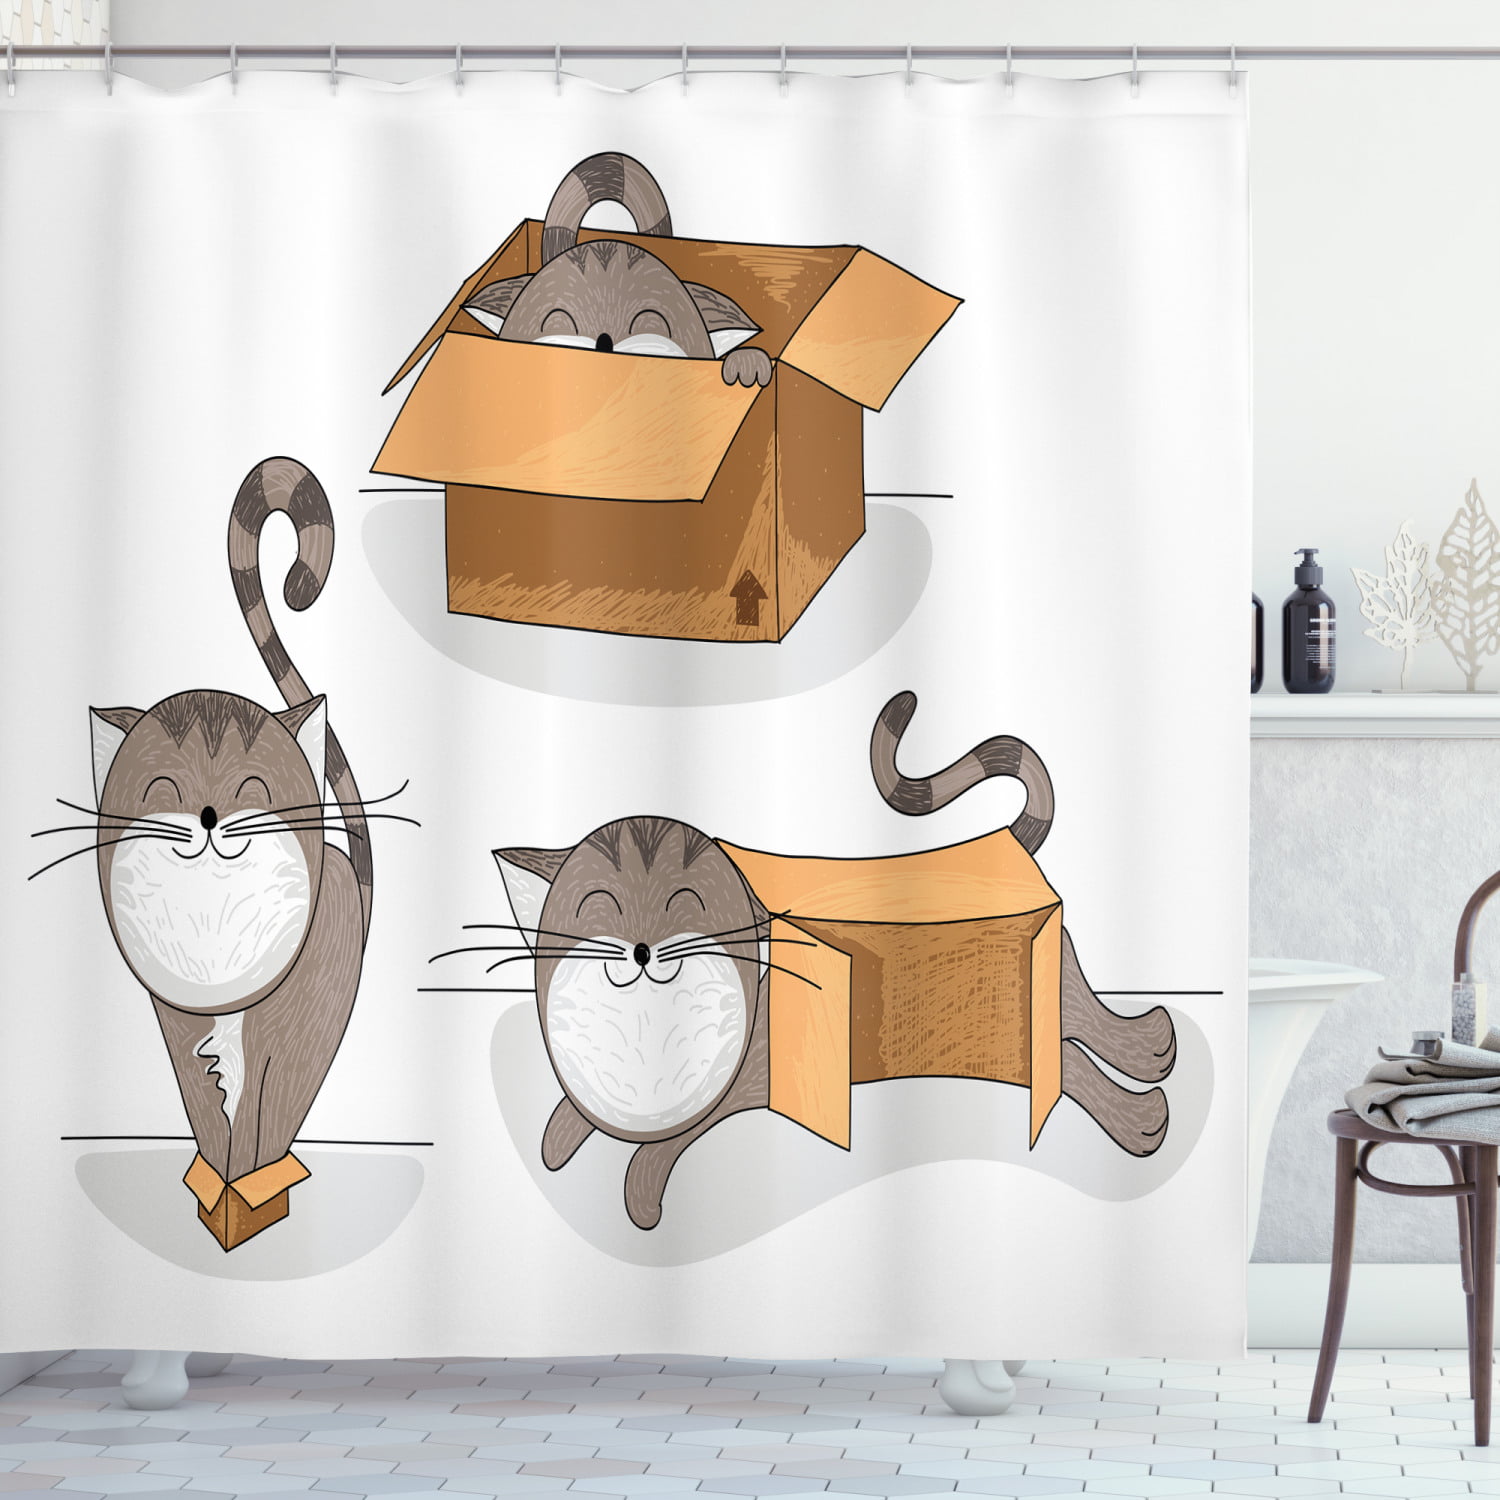 Details about   Japanese Ukiyo-e Funny Whale Cat Shower Curtain & Hooks Bathroom Accessory Sets 